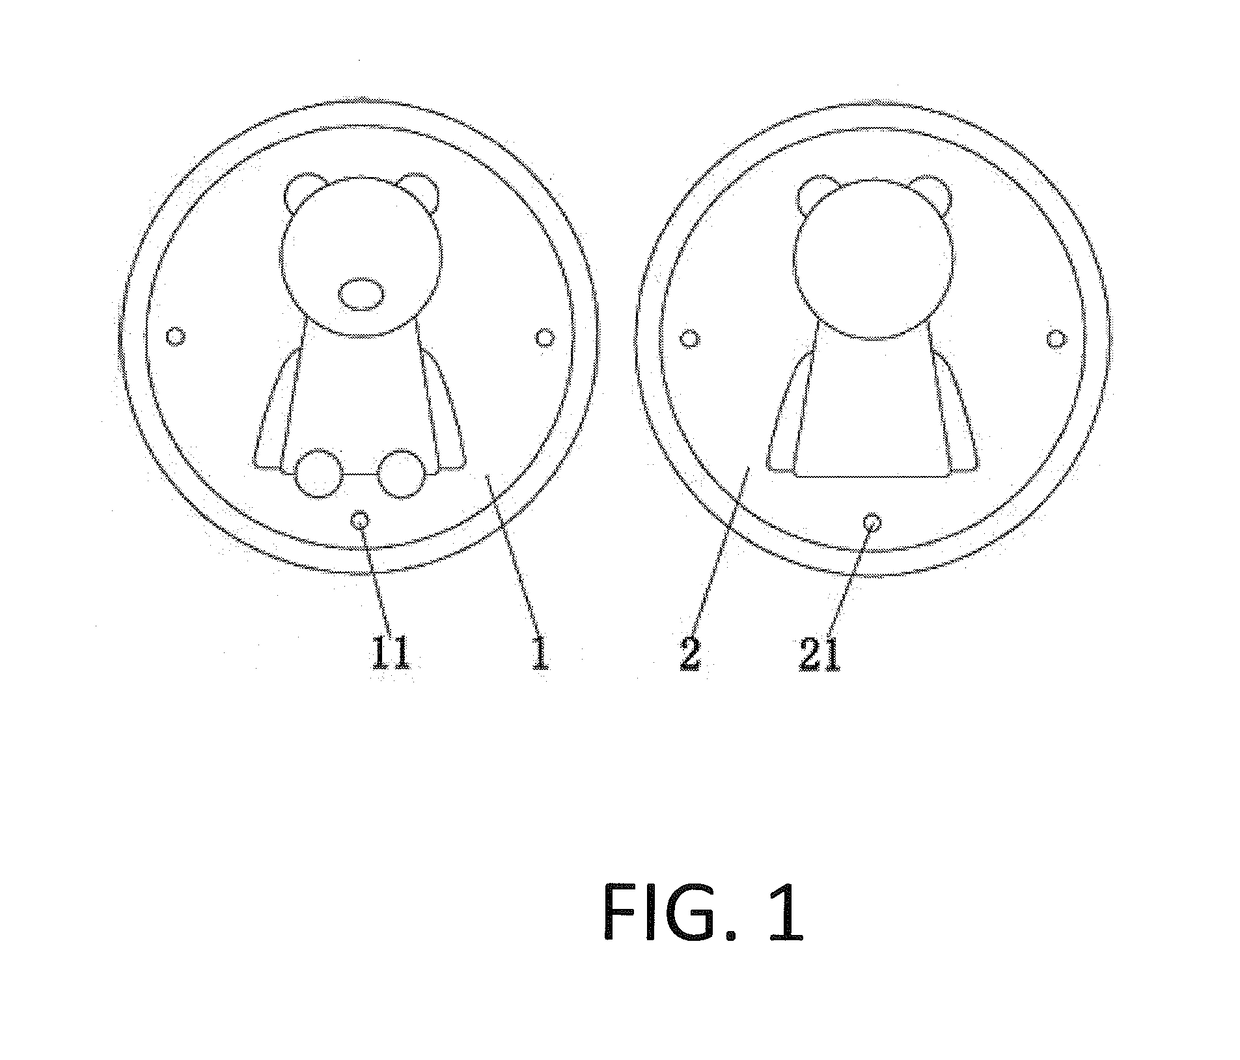 Method for Molding Three-Dimensional Toy